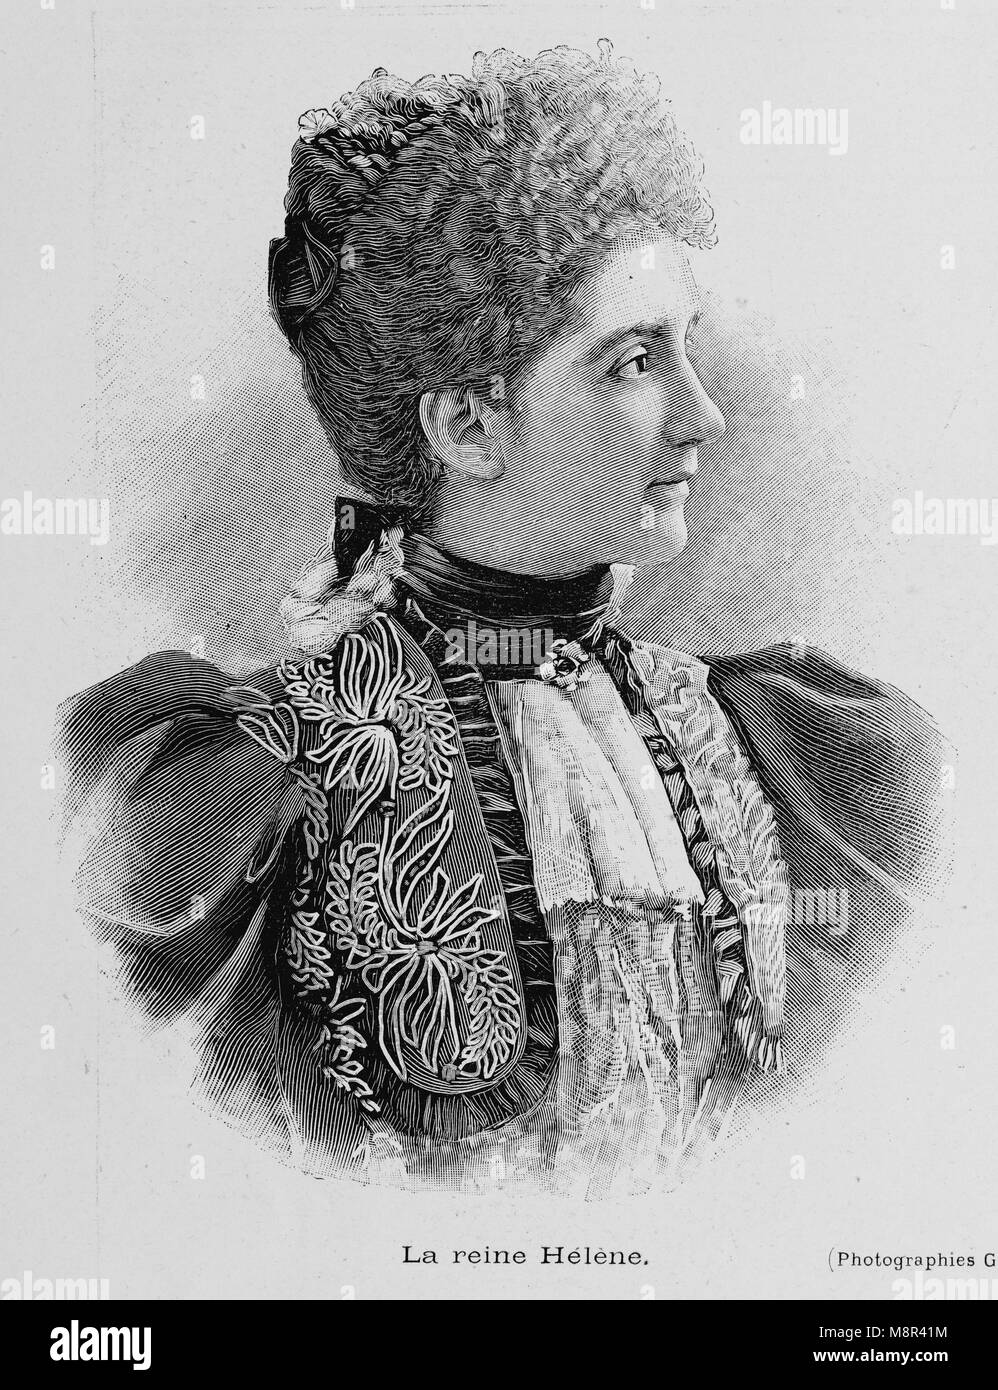 Queen Elena of Montenegro, the wife of King Victor Emmanuel III of Italy, Picture from the French weekly newspaper l'Illustration, 4th August 1900 Stock Photo